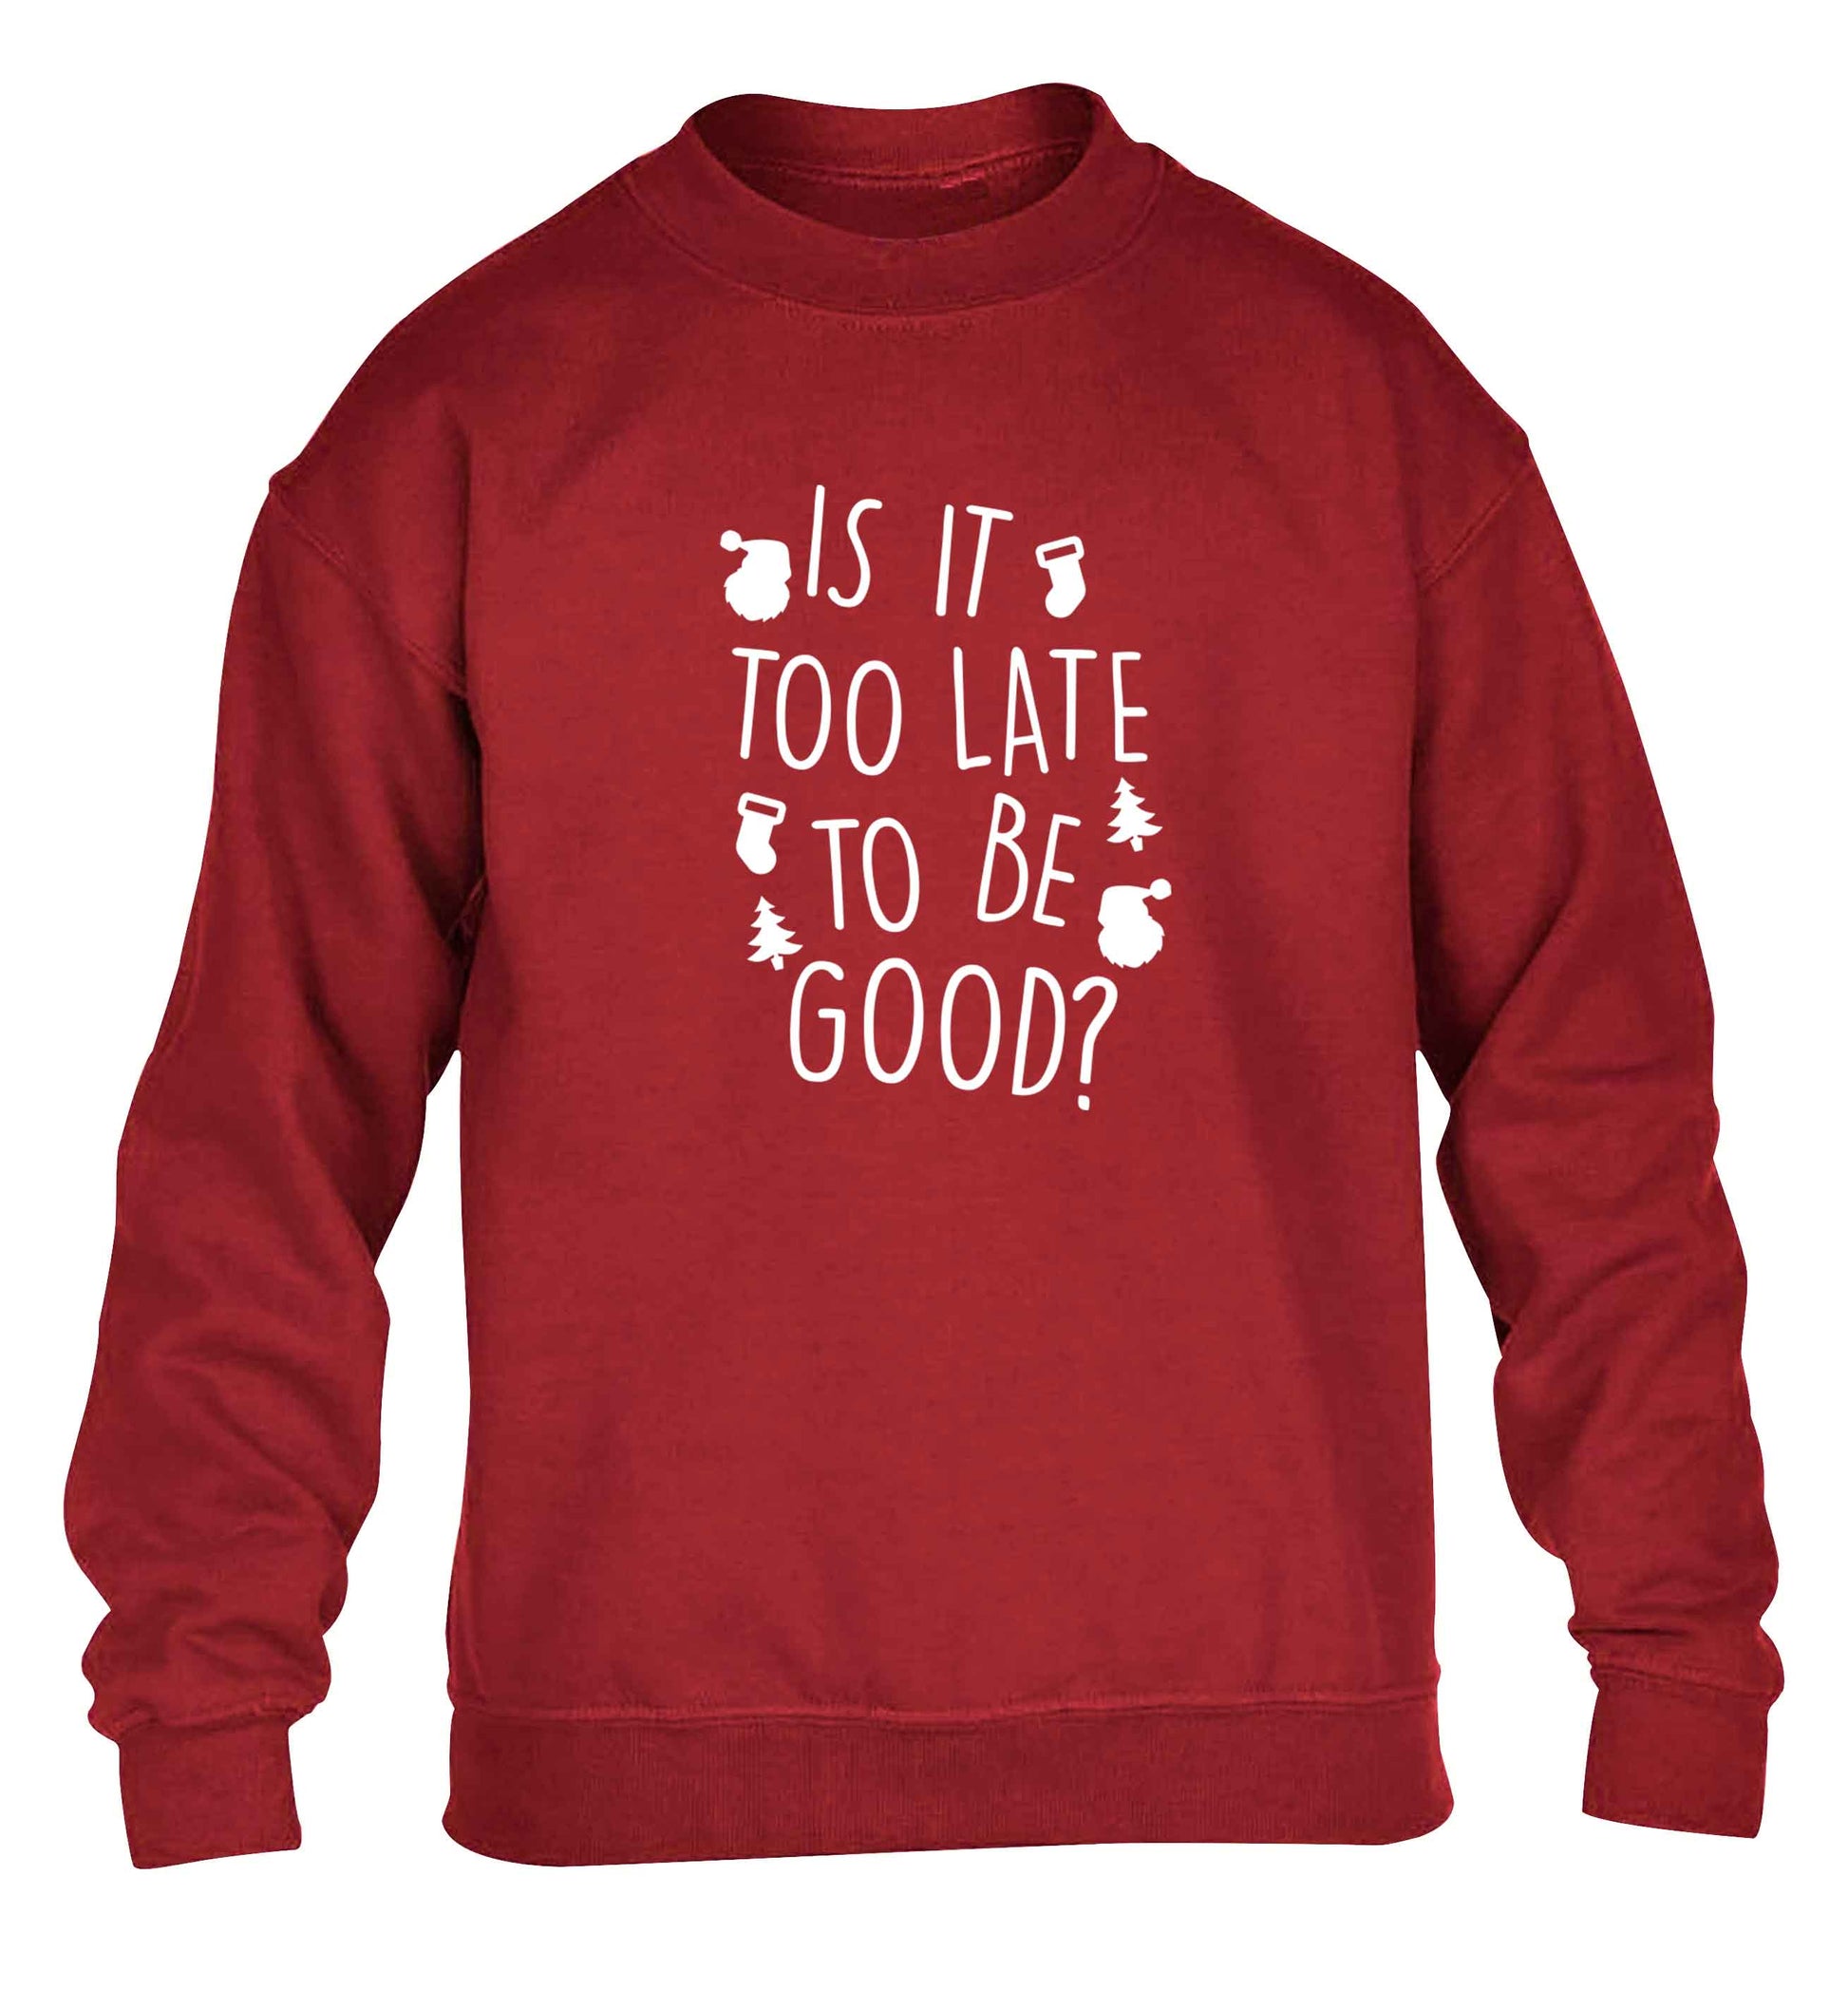 Too Late to be Good children's grey sweater 12-13 Years